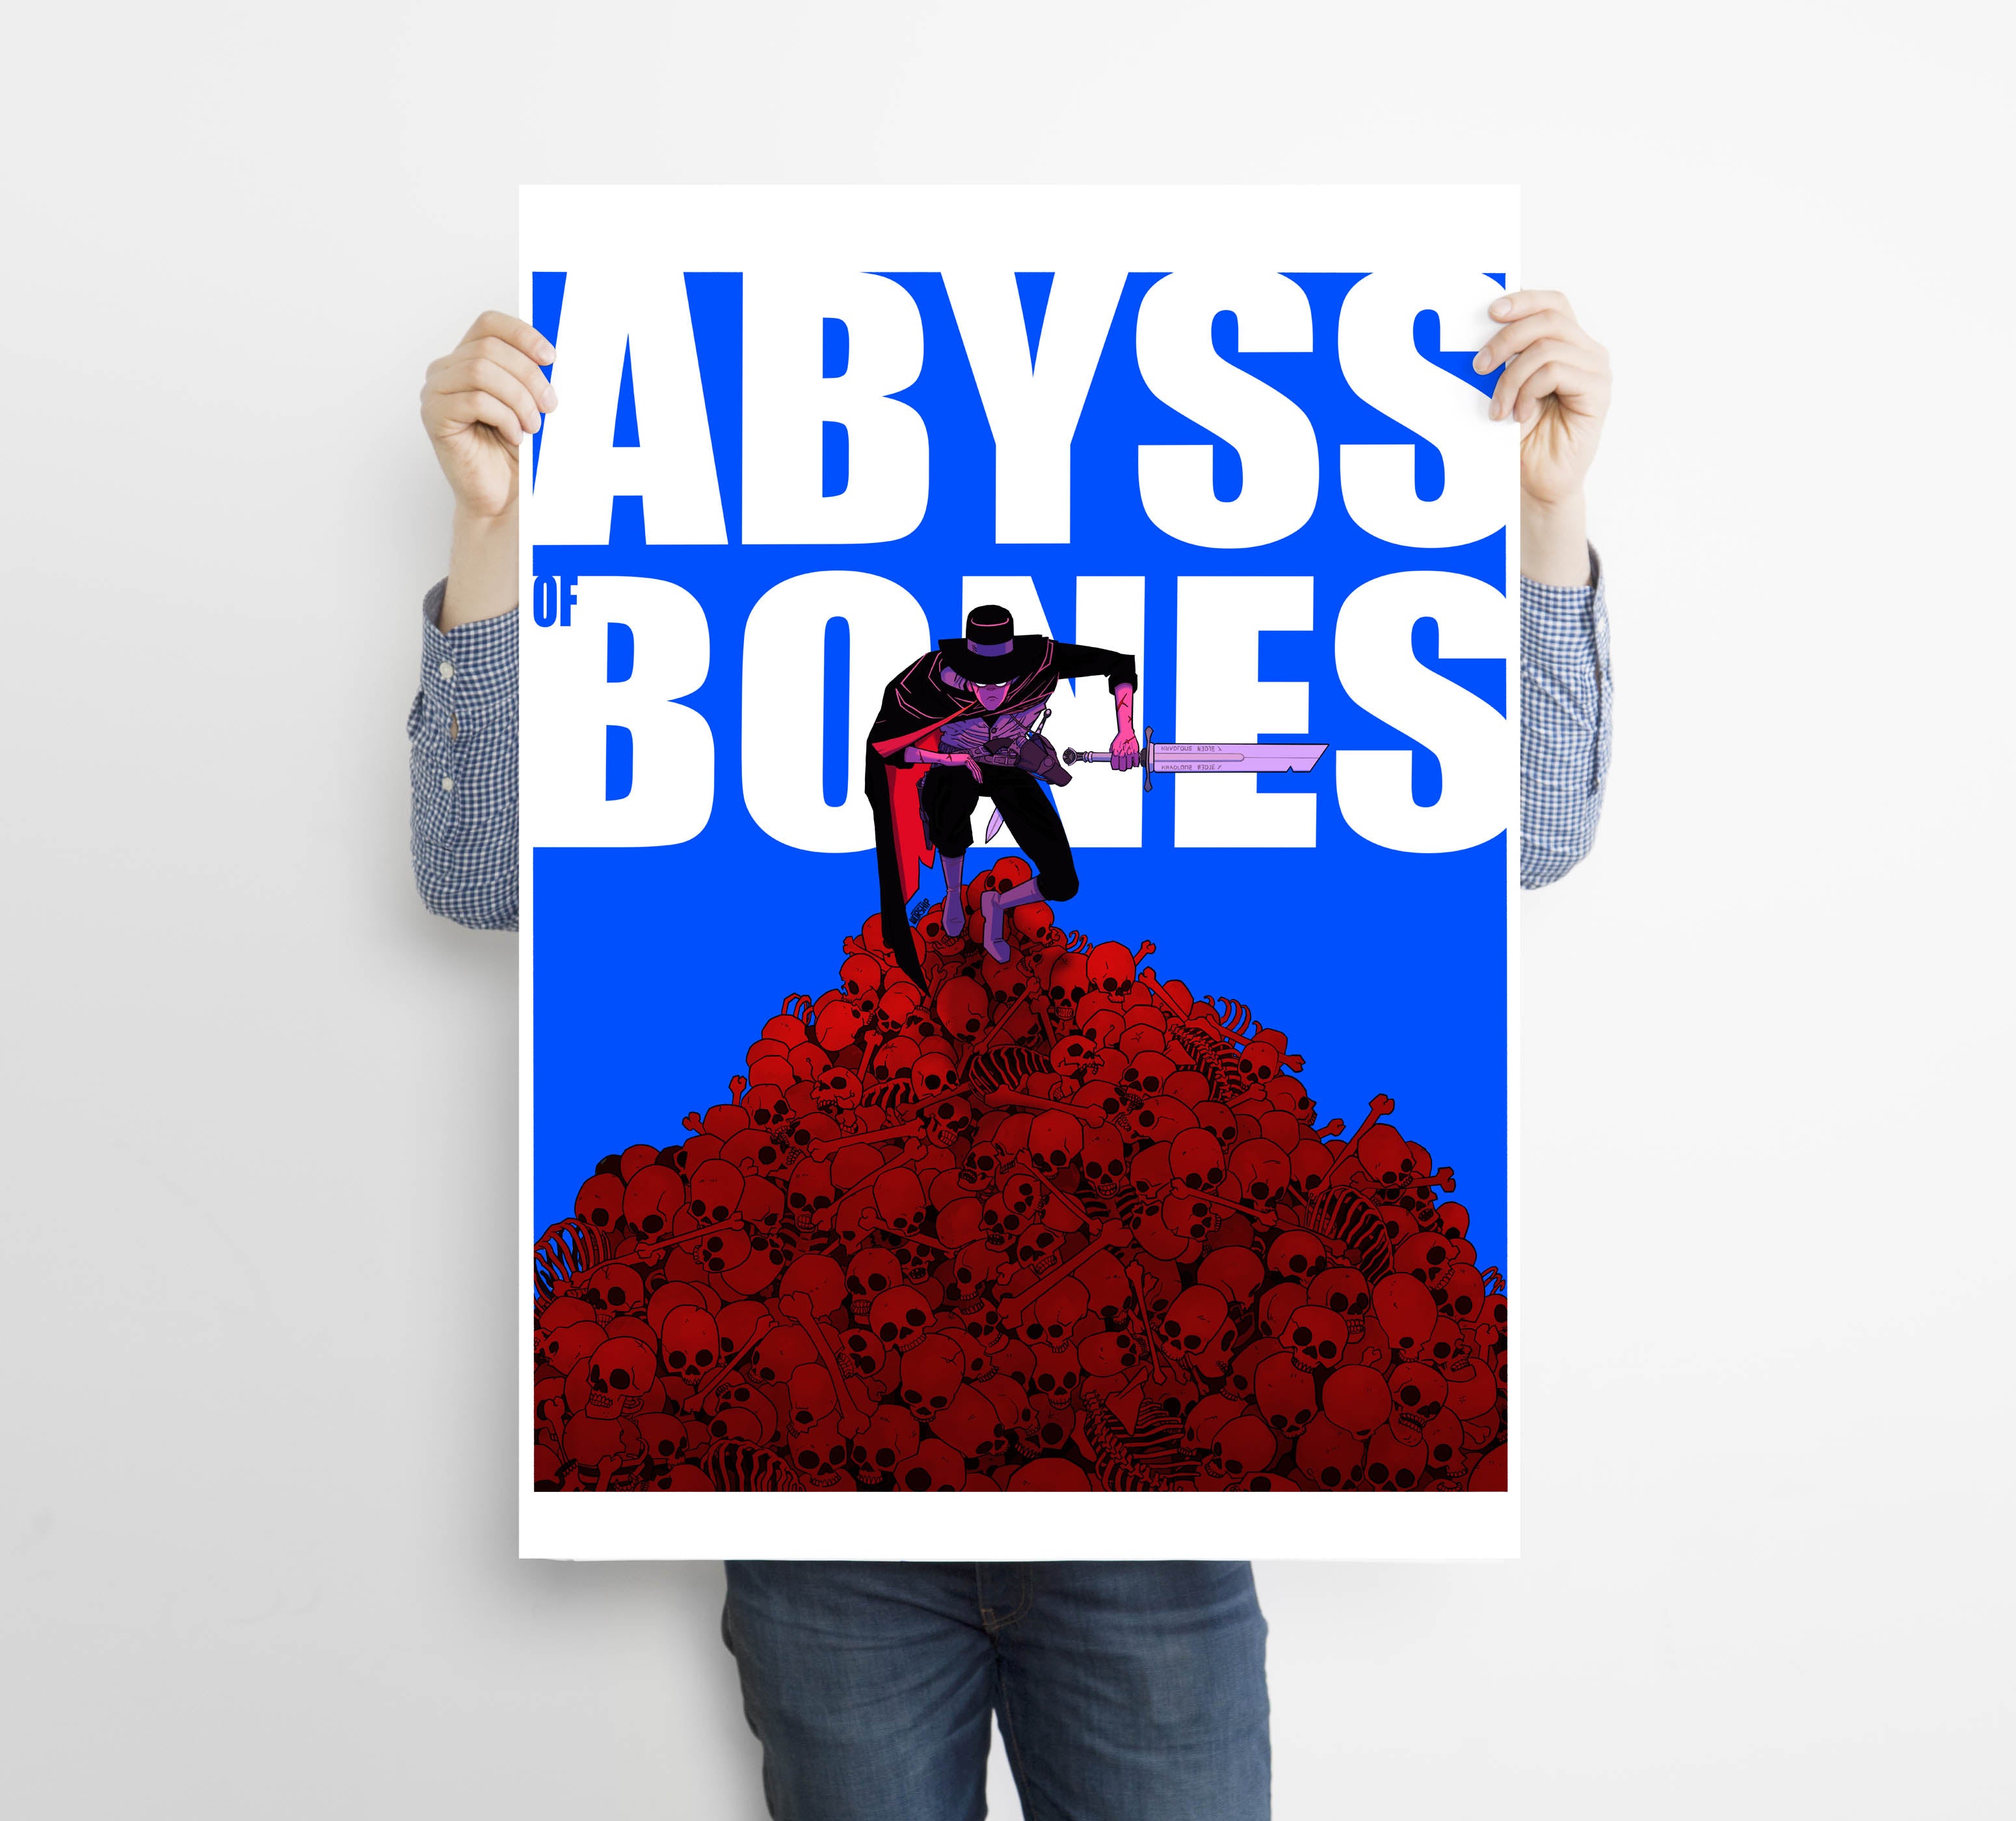 Unique and cool Gorillaz-style Abyss of Bones poster/wall art illustration